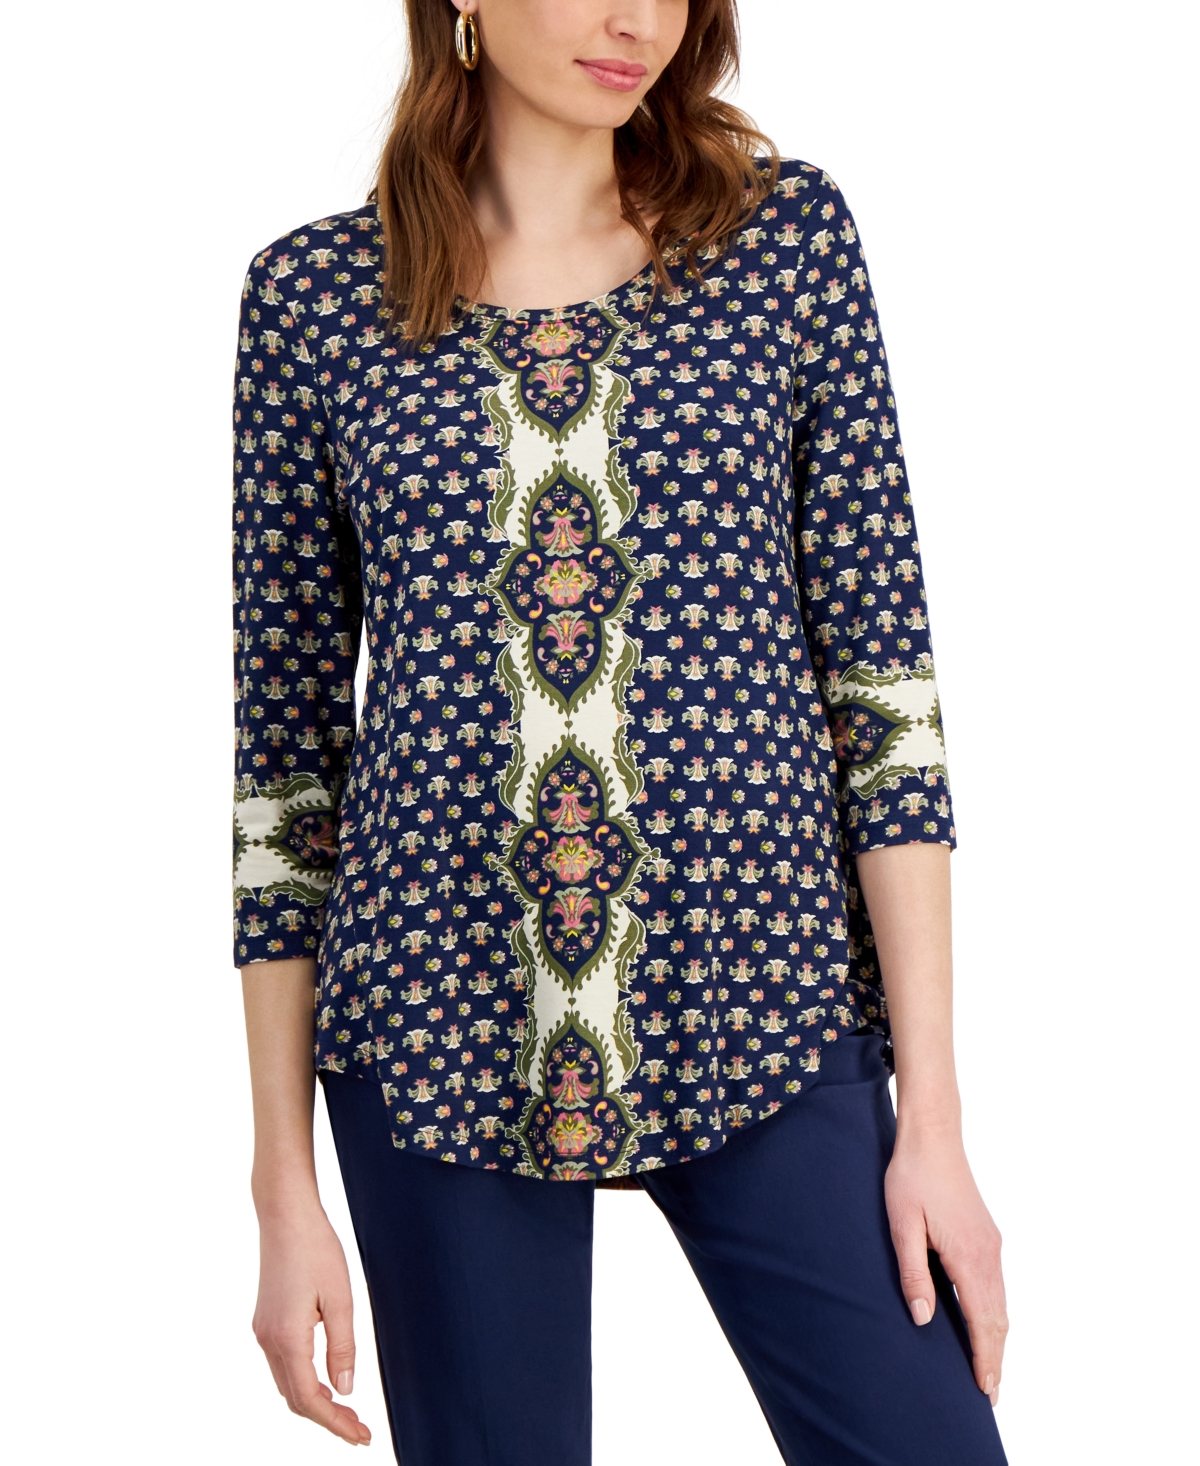 Women's Printed 3/4-Sleeve Top, Created for Macy's - Intrepid Blue Combo